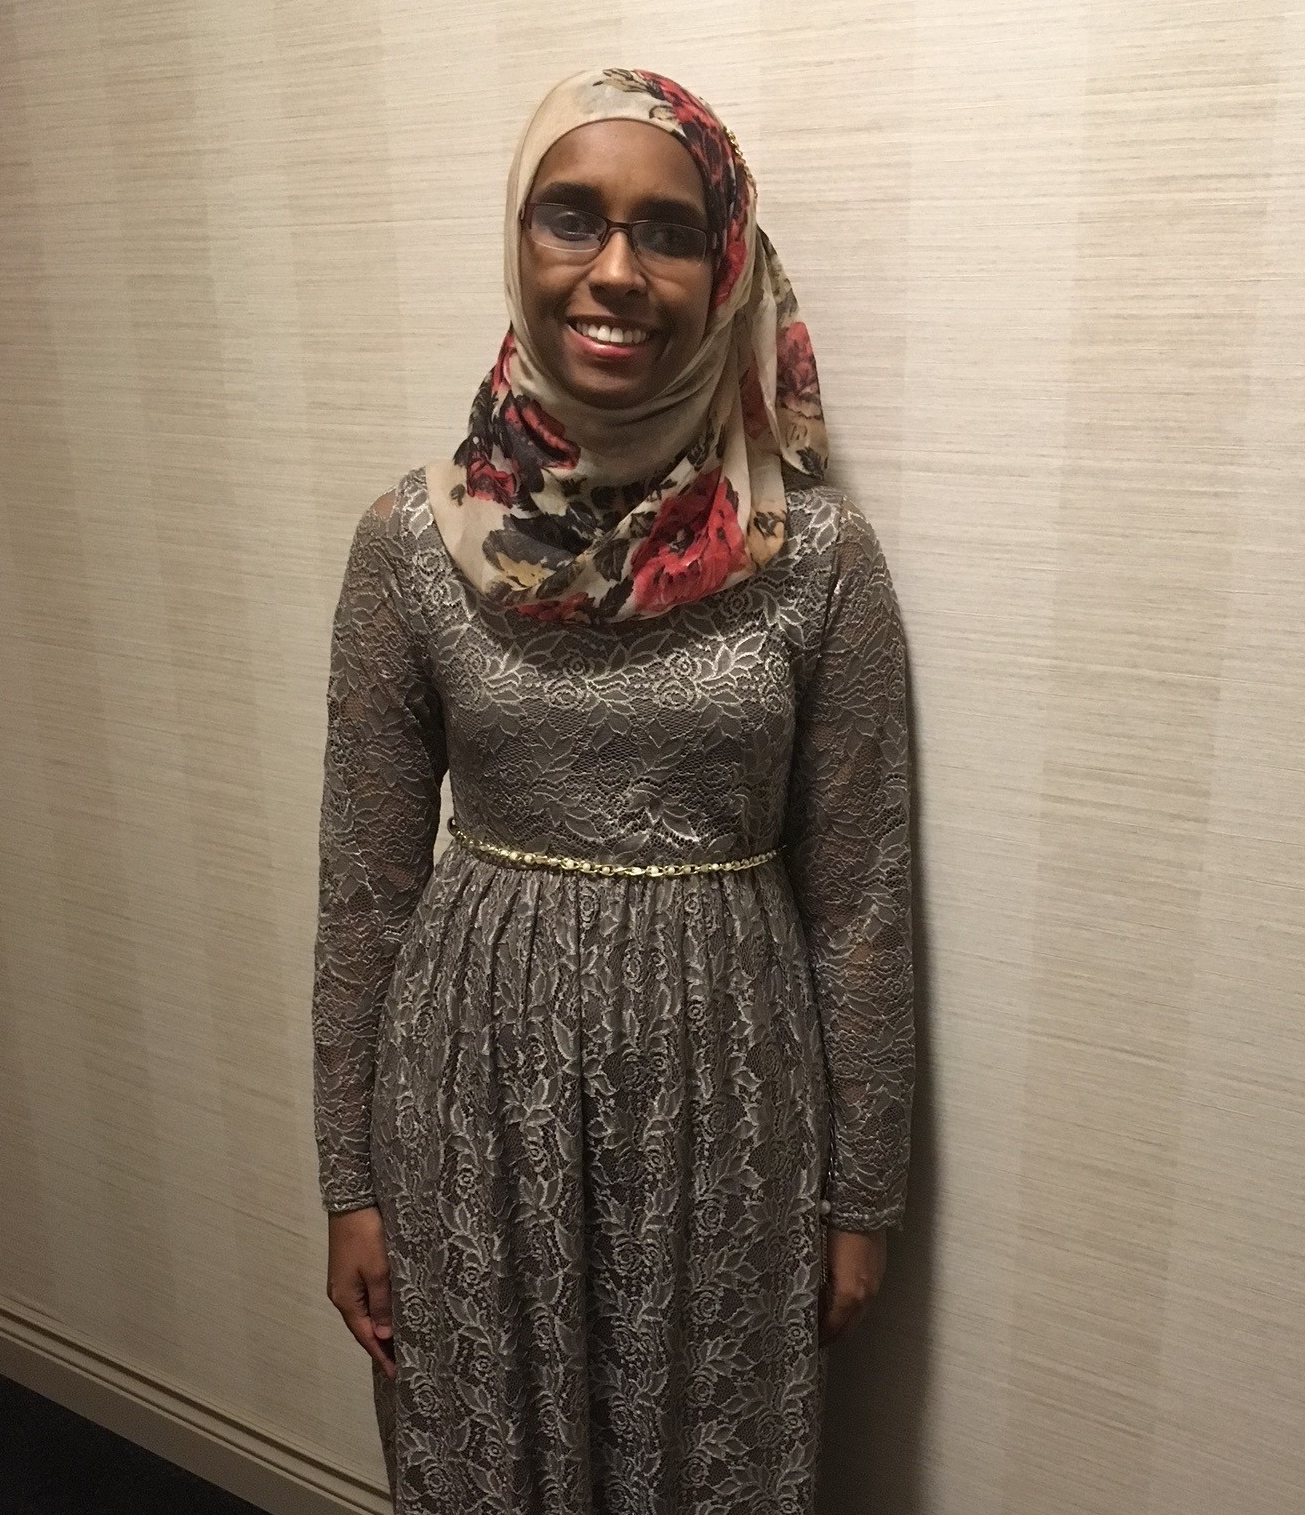 Ramla smiles and poses for a photo against a white background. She is wearing a grey dress and a hijab.